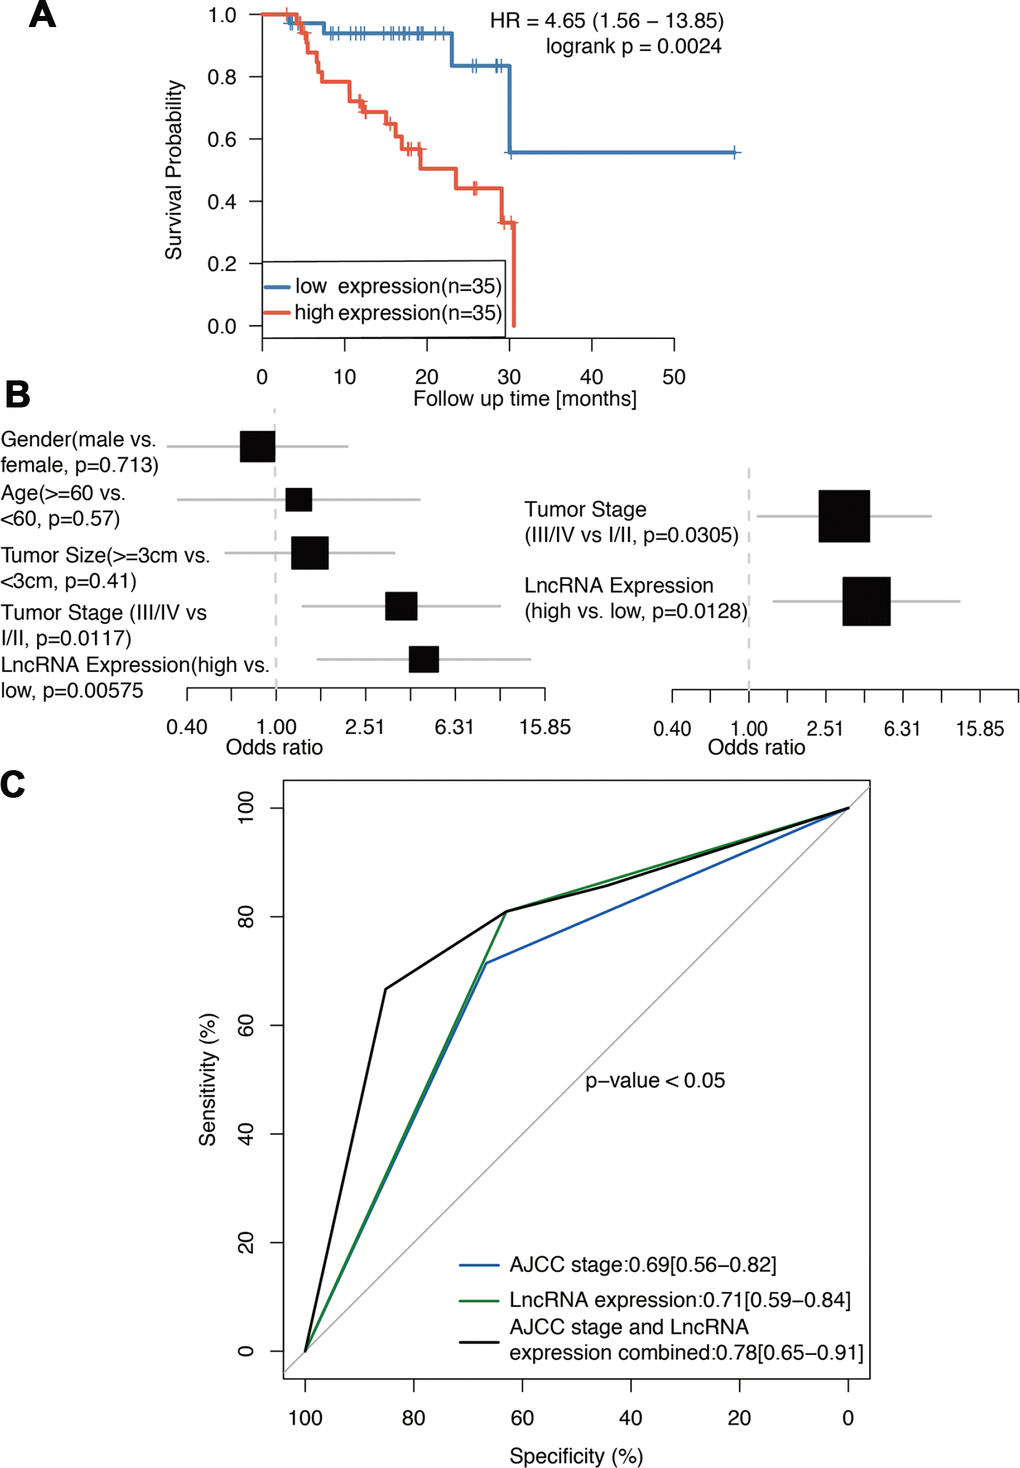 ENSG00000254041.1 is prognostics biomarker of PC. (A) Survival analysis of 70 PC patients with high and low expression of the ENSG00000254041.1 in our cohort. (B) Univariate and multivariate regression analyses (all bars correspond to the 95% confidence intervals). (C) ROC analysis of ENSG00000254041.1 expression level for survival prediction of patients with PC.